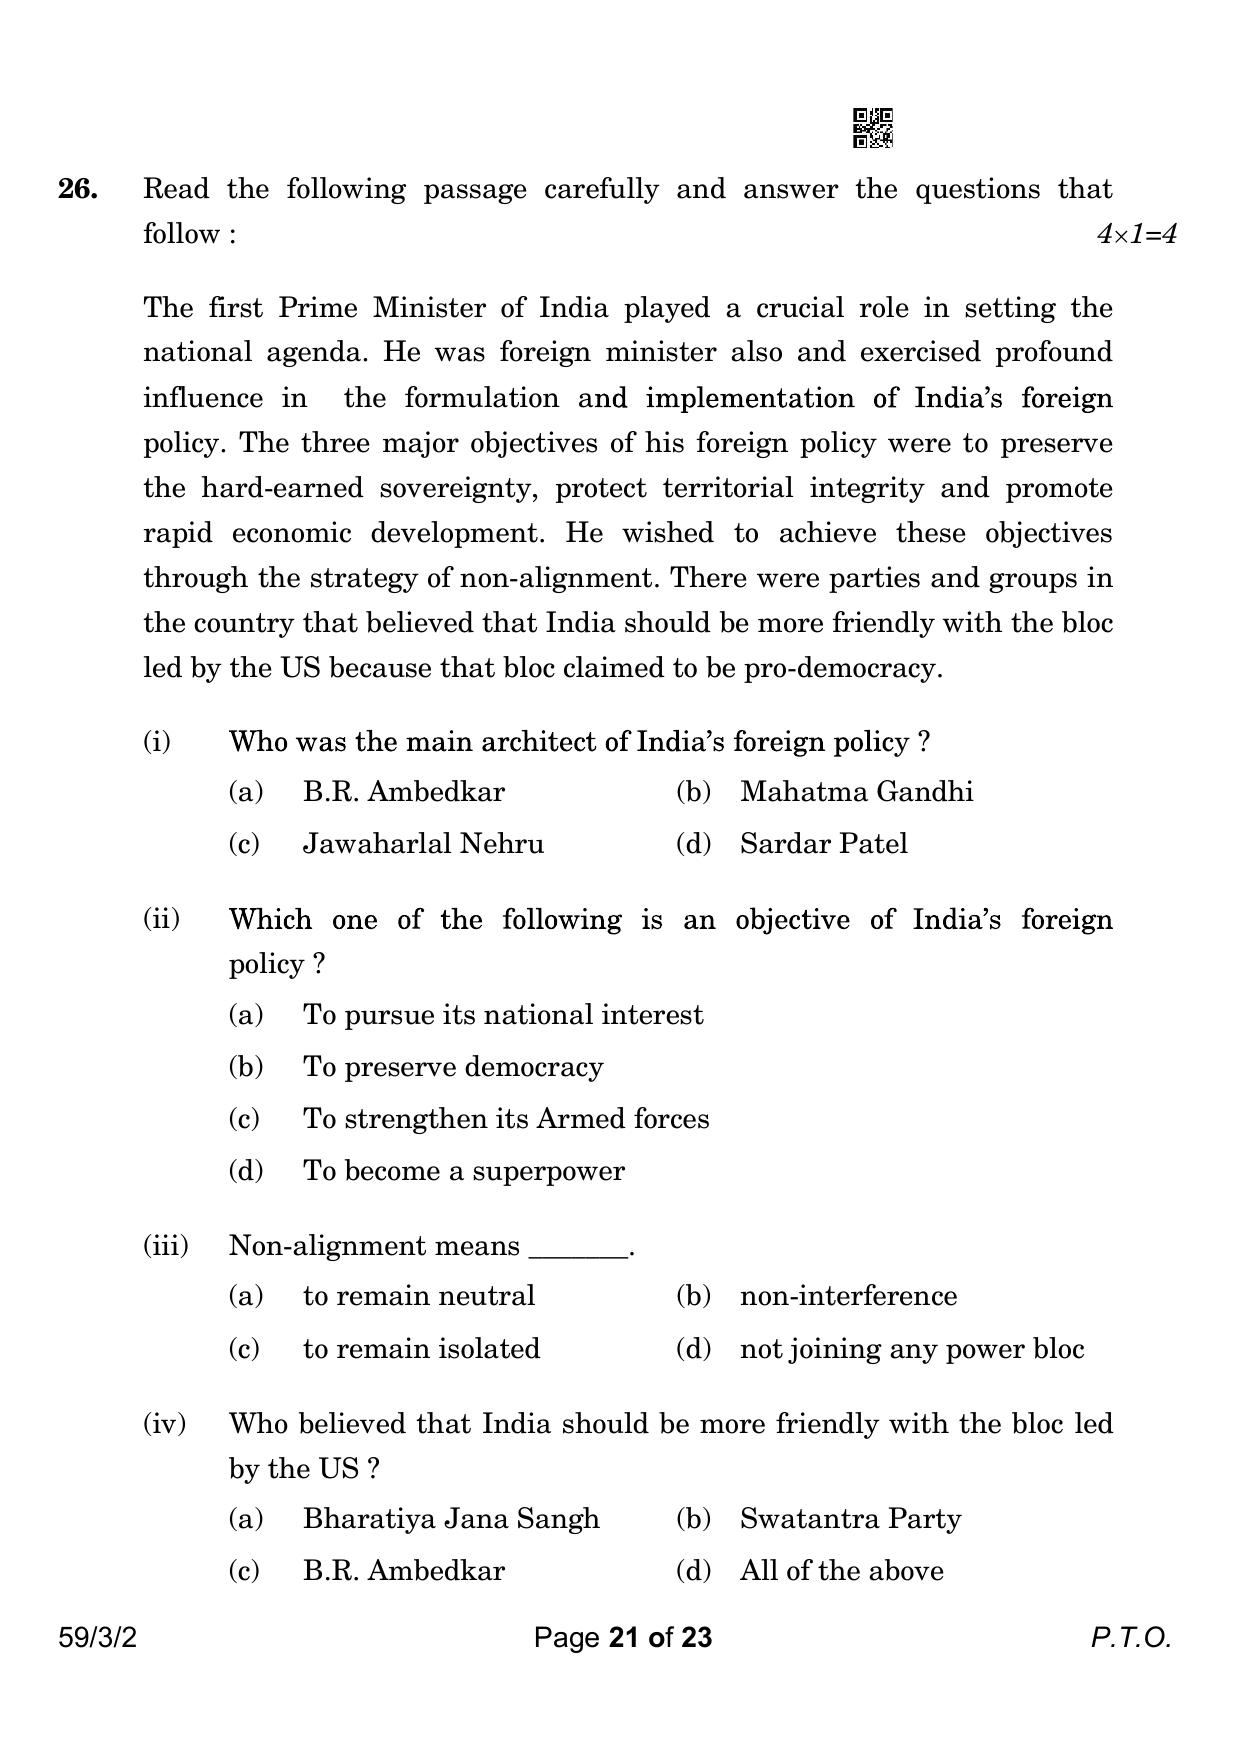 CBSE Class 12 59-3-2 Political Science 2023 Question Paper - Page 21